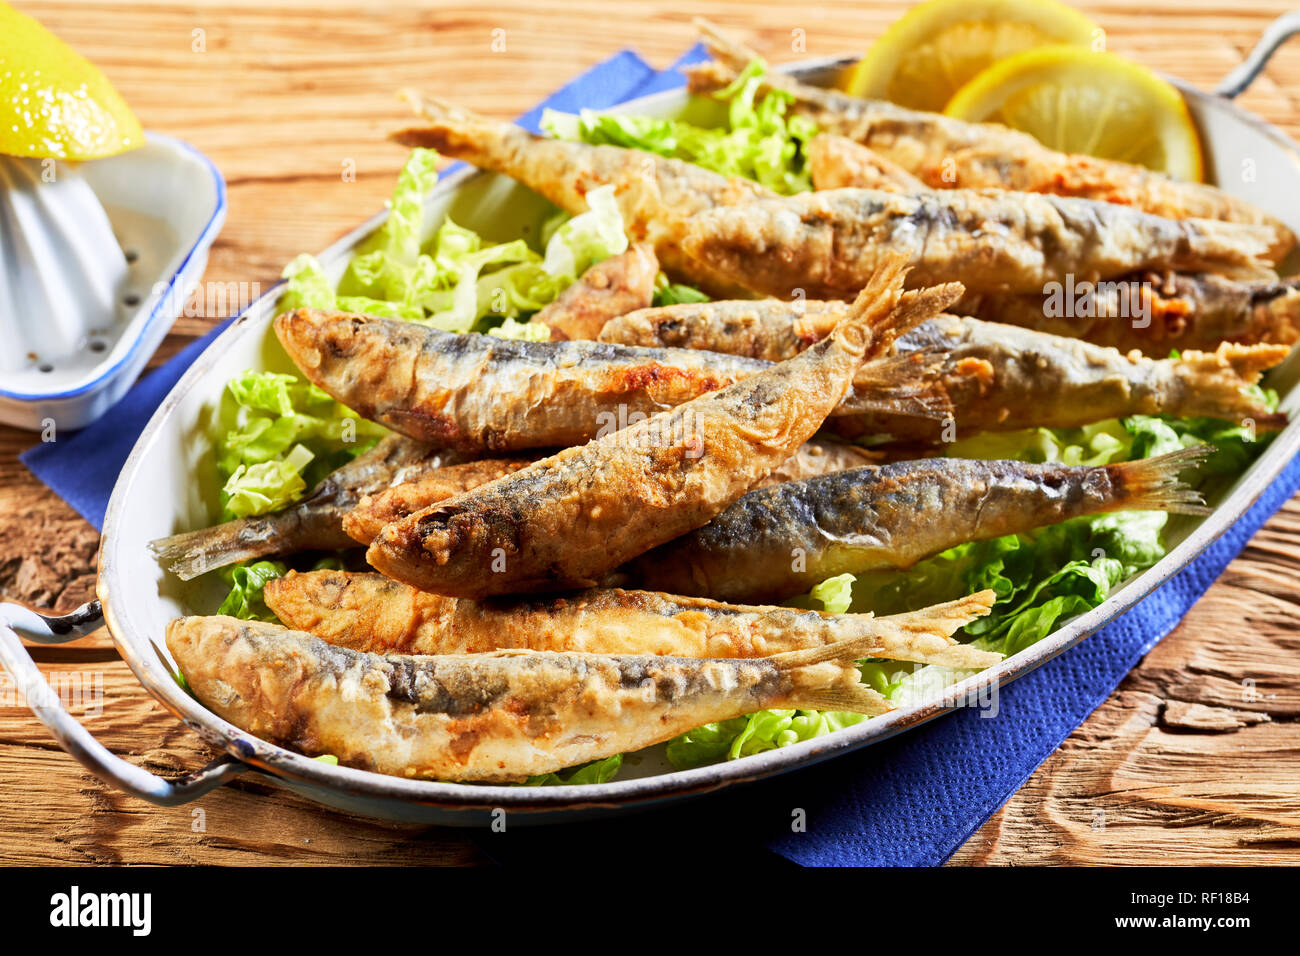 Dish of battered fried sardines, pilchards or anchovies on a bed of fresh lettuce for a healthy Greek regional meal Stock Photo